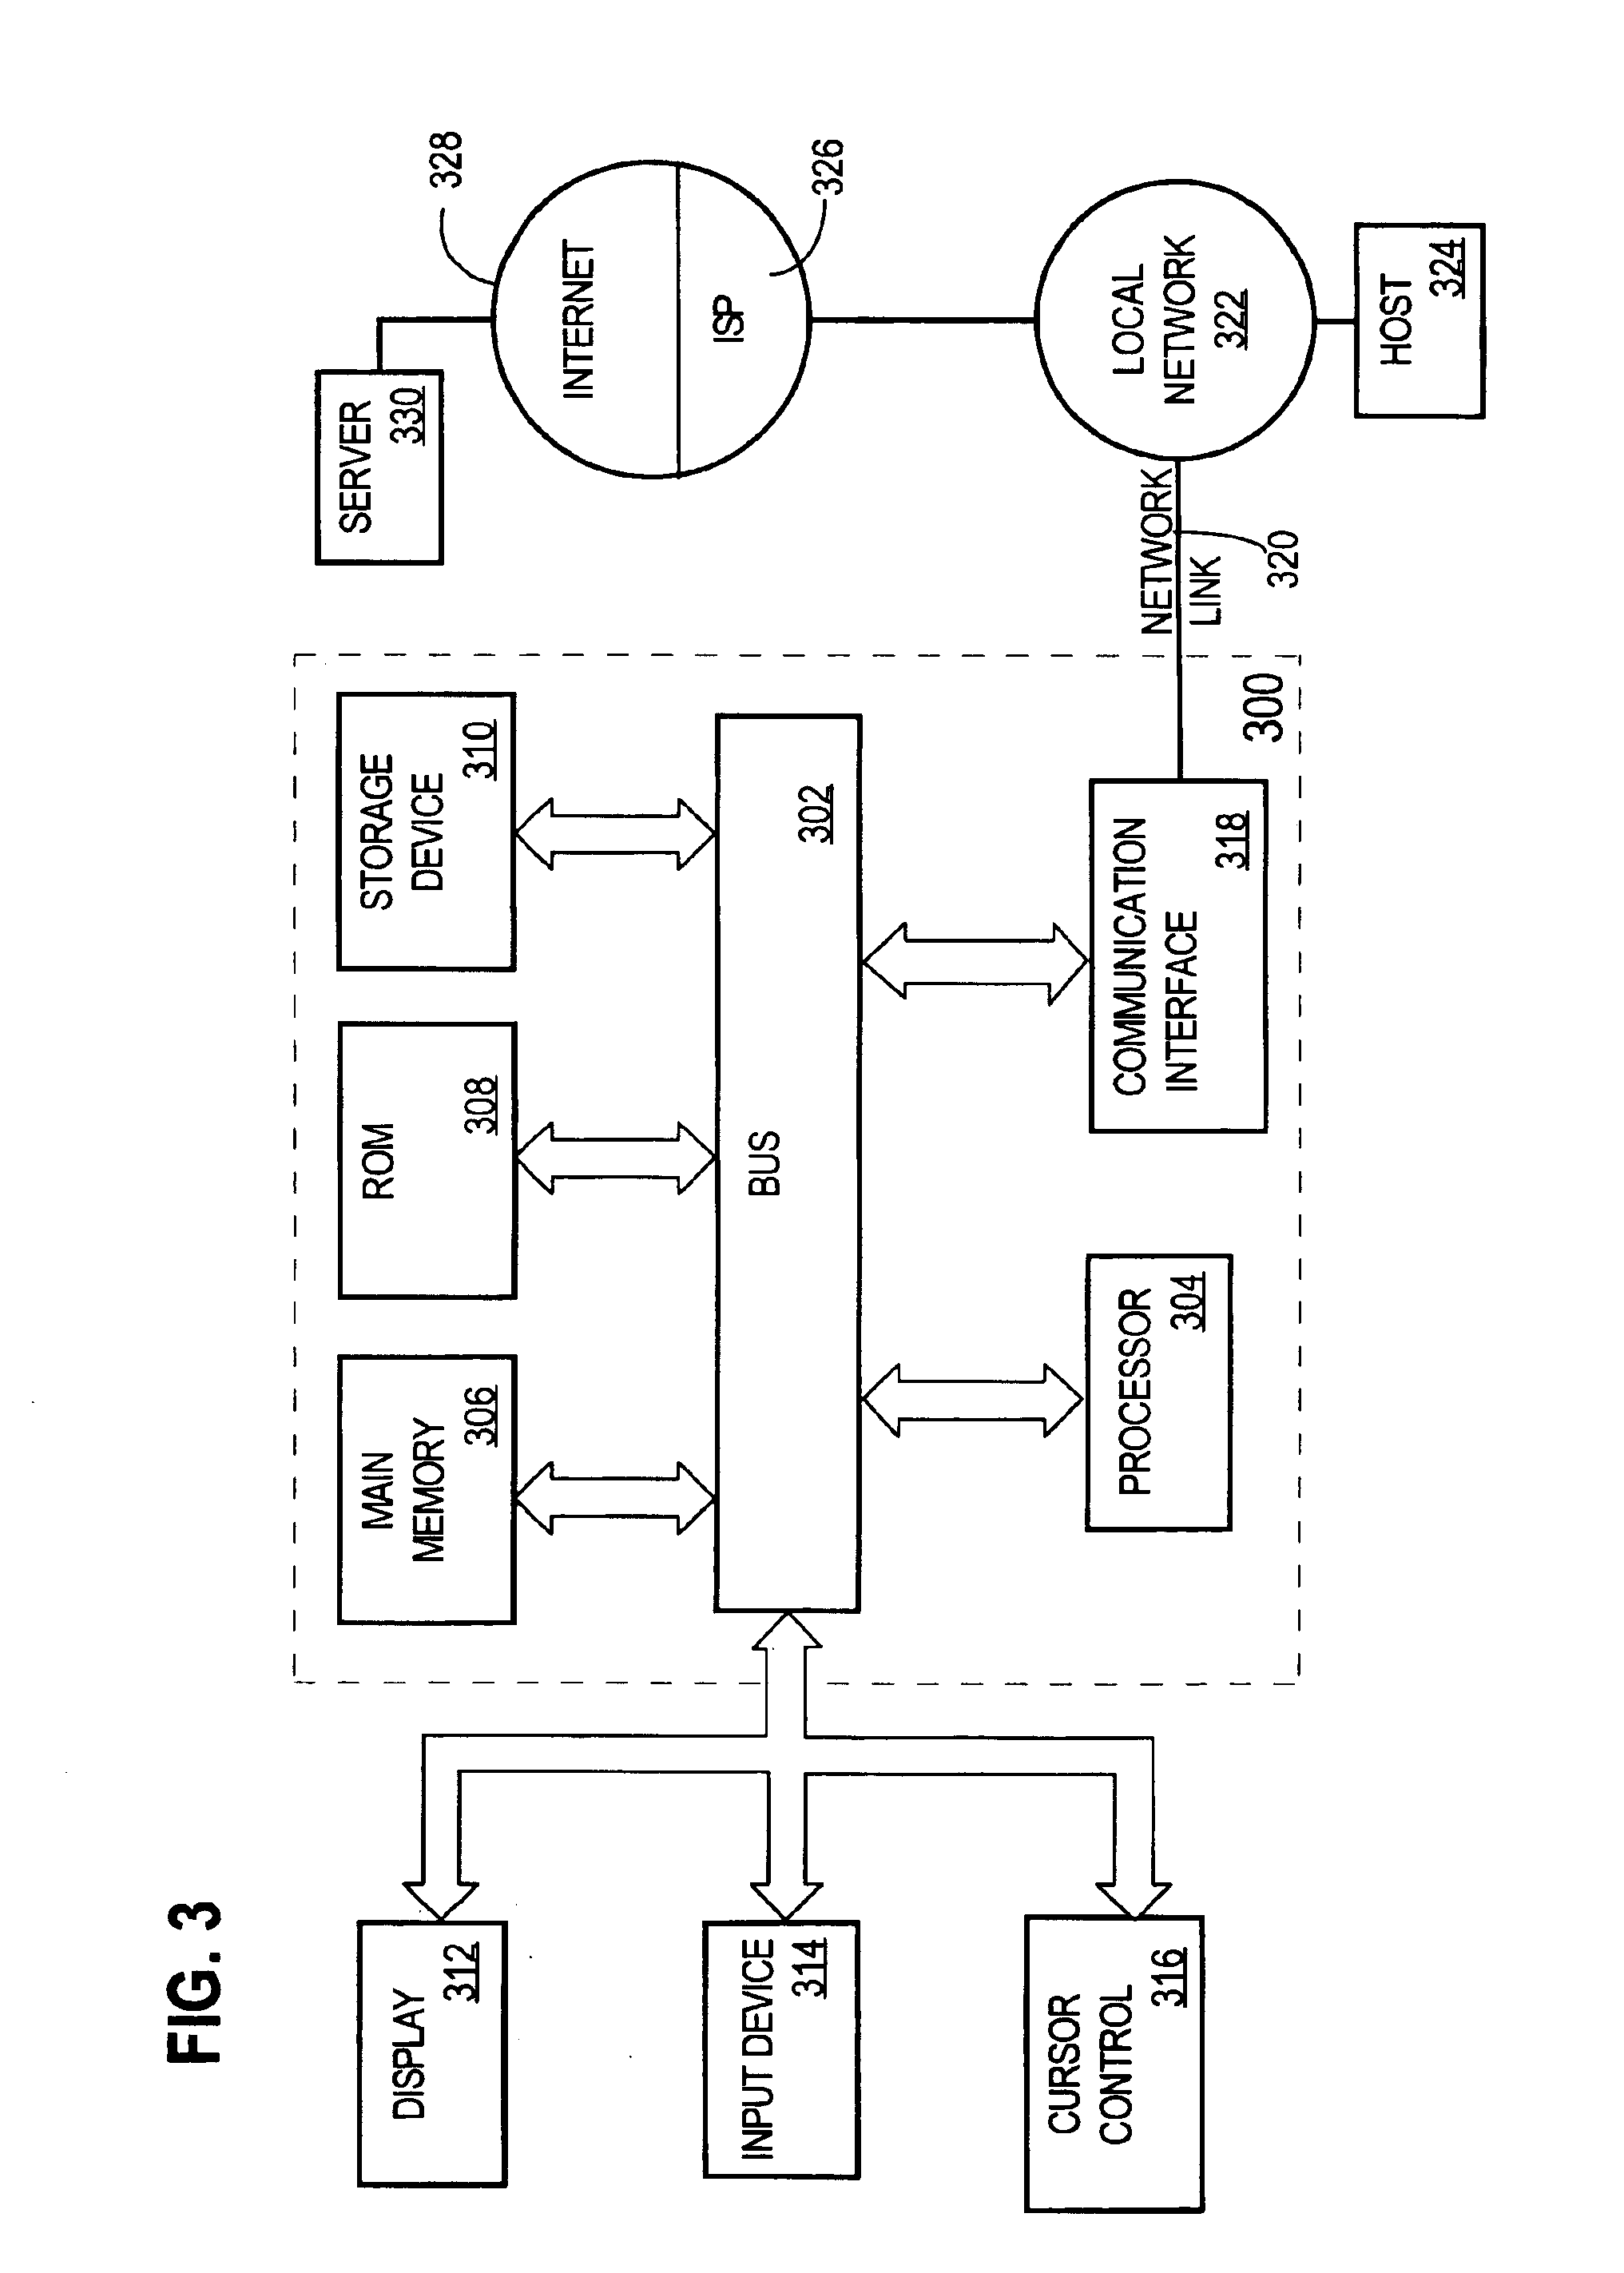 Method and apparatus for flexible storage and uniform manipulation of XML data in a relational database system